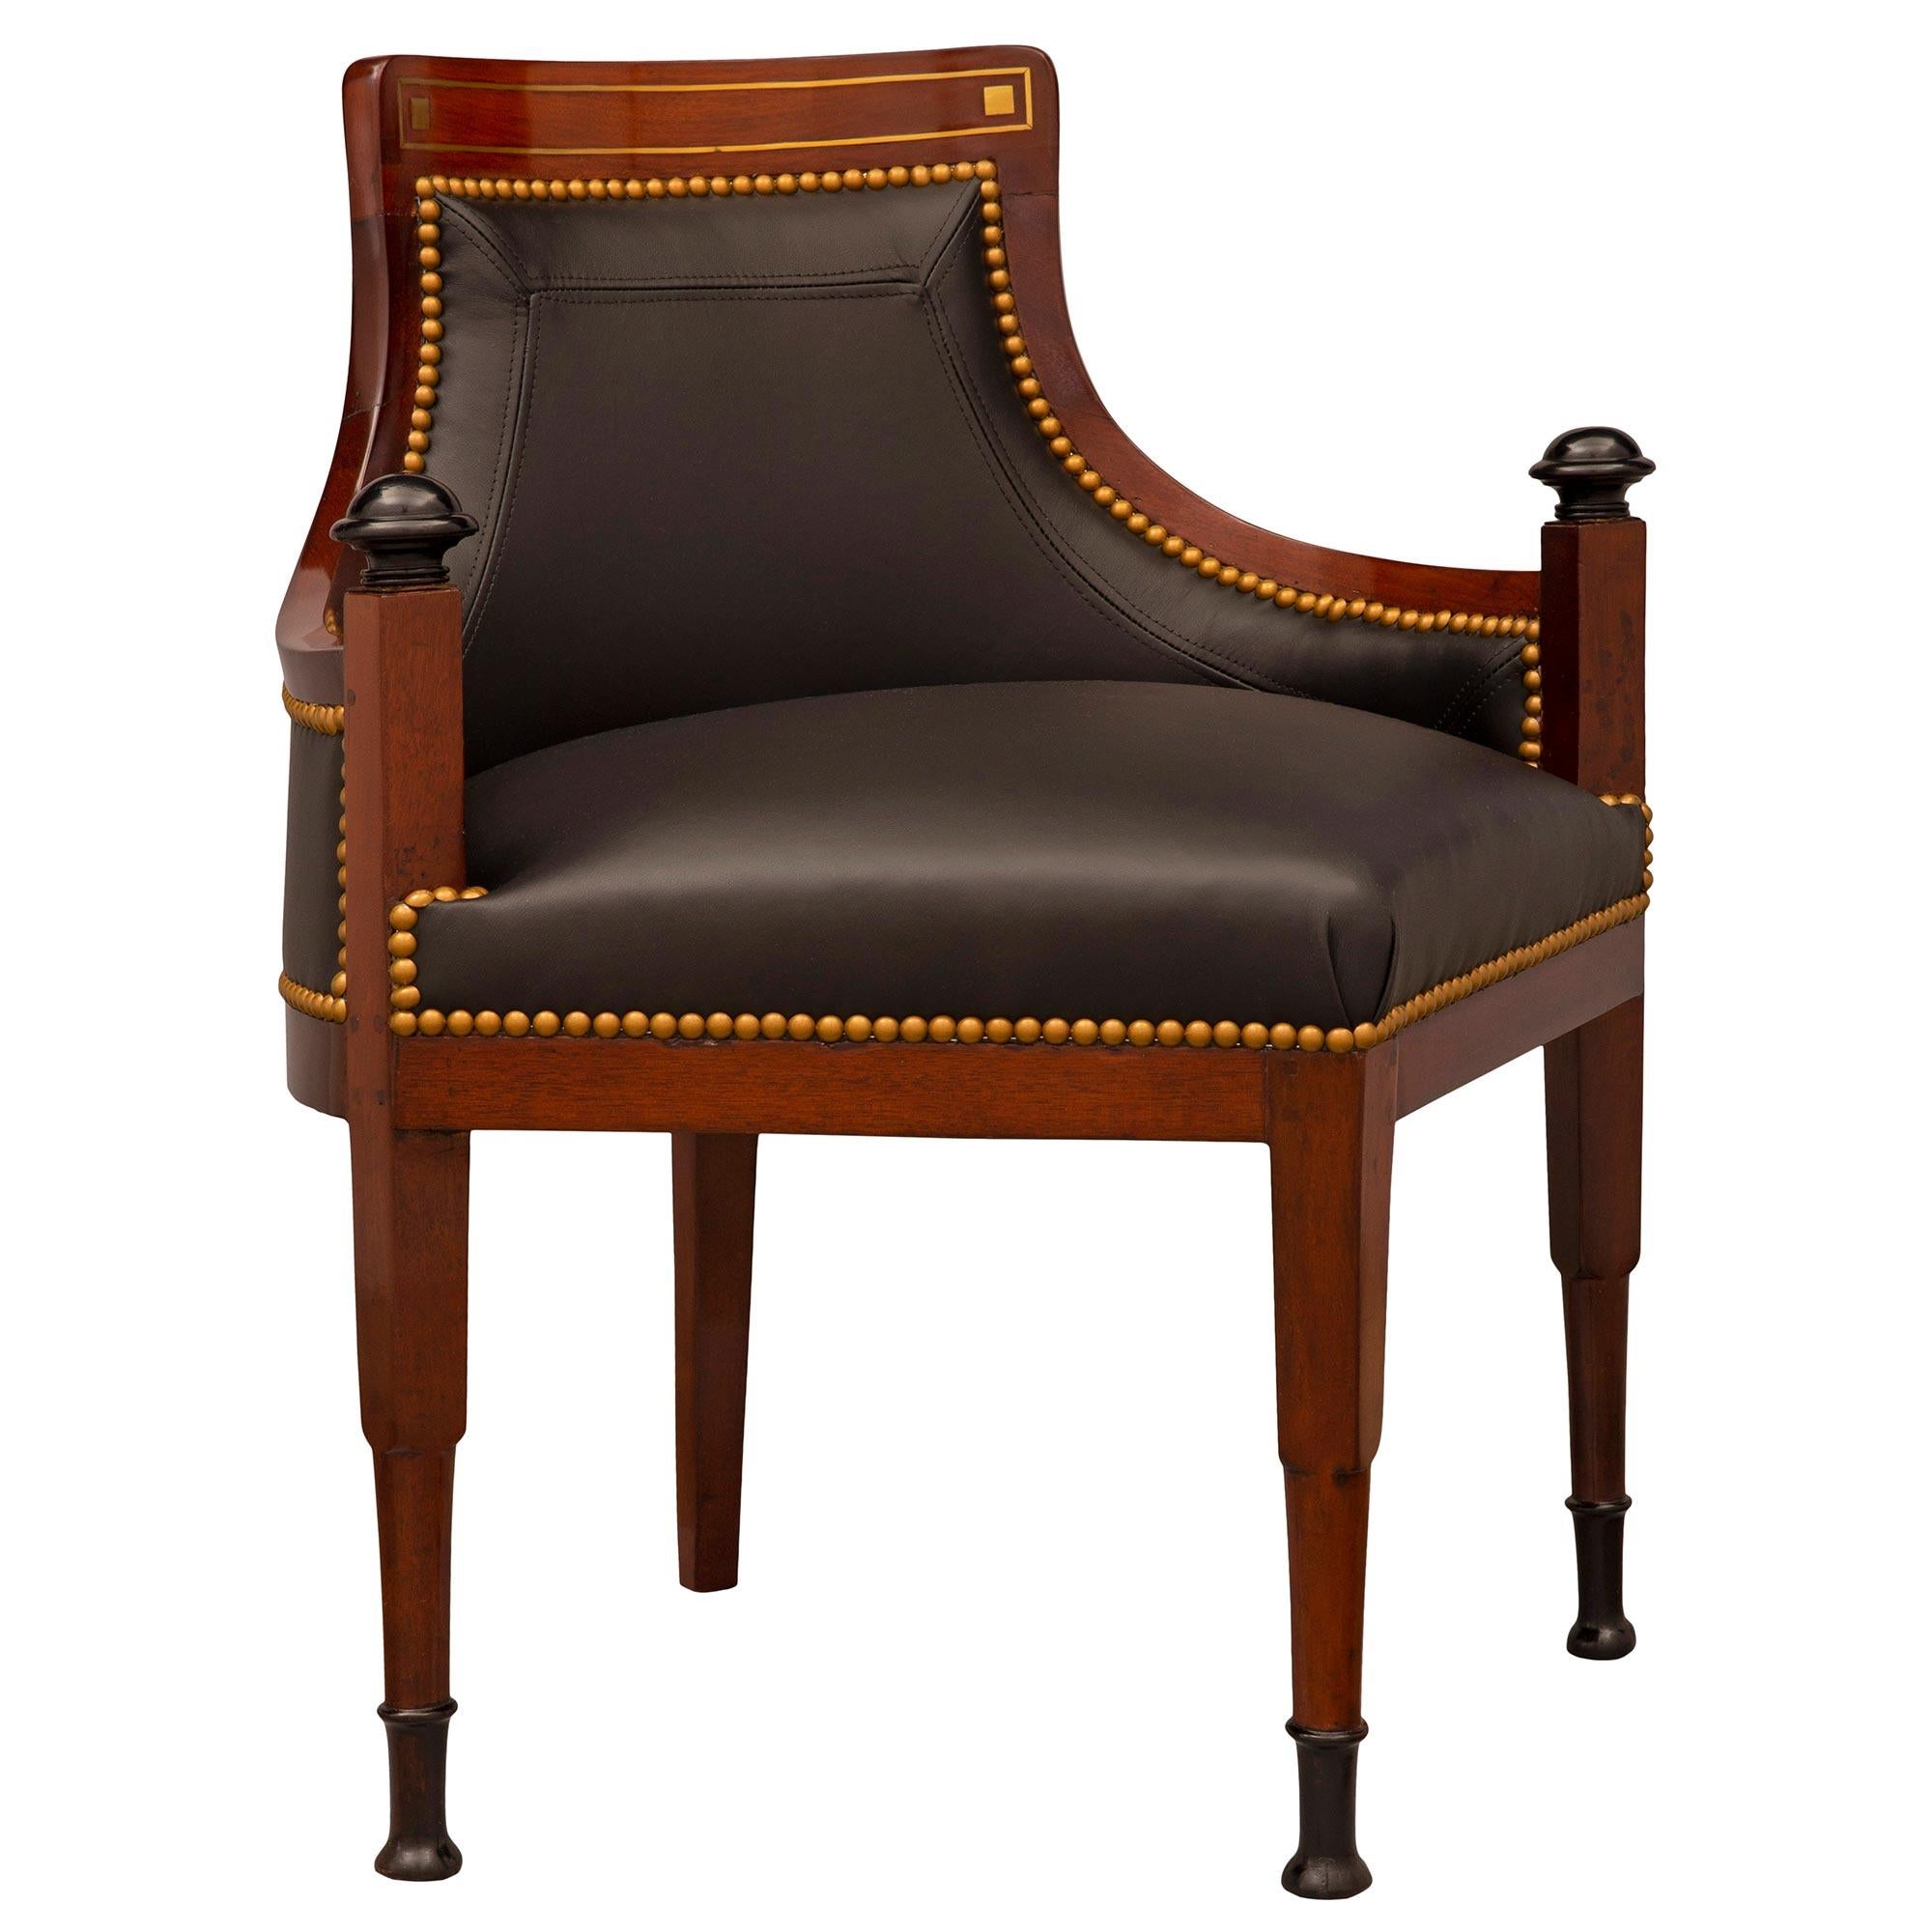 An exceptional and extremely unique pair of Baltic 19th century Neo-Classical st. Walnut, ebonized Fruitwood, and brass chairs. Each chair is raised by unique and most decorative square and circular Walnut legs with superb ebonized Fruitwood